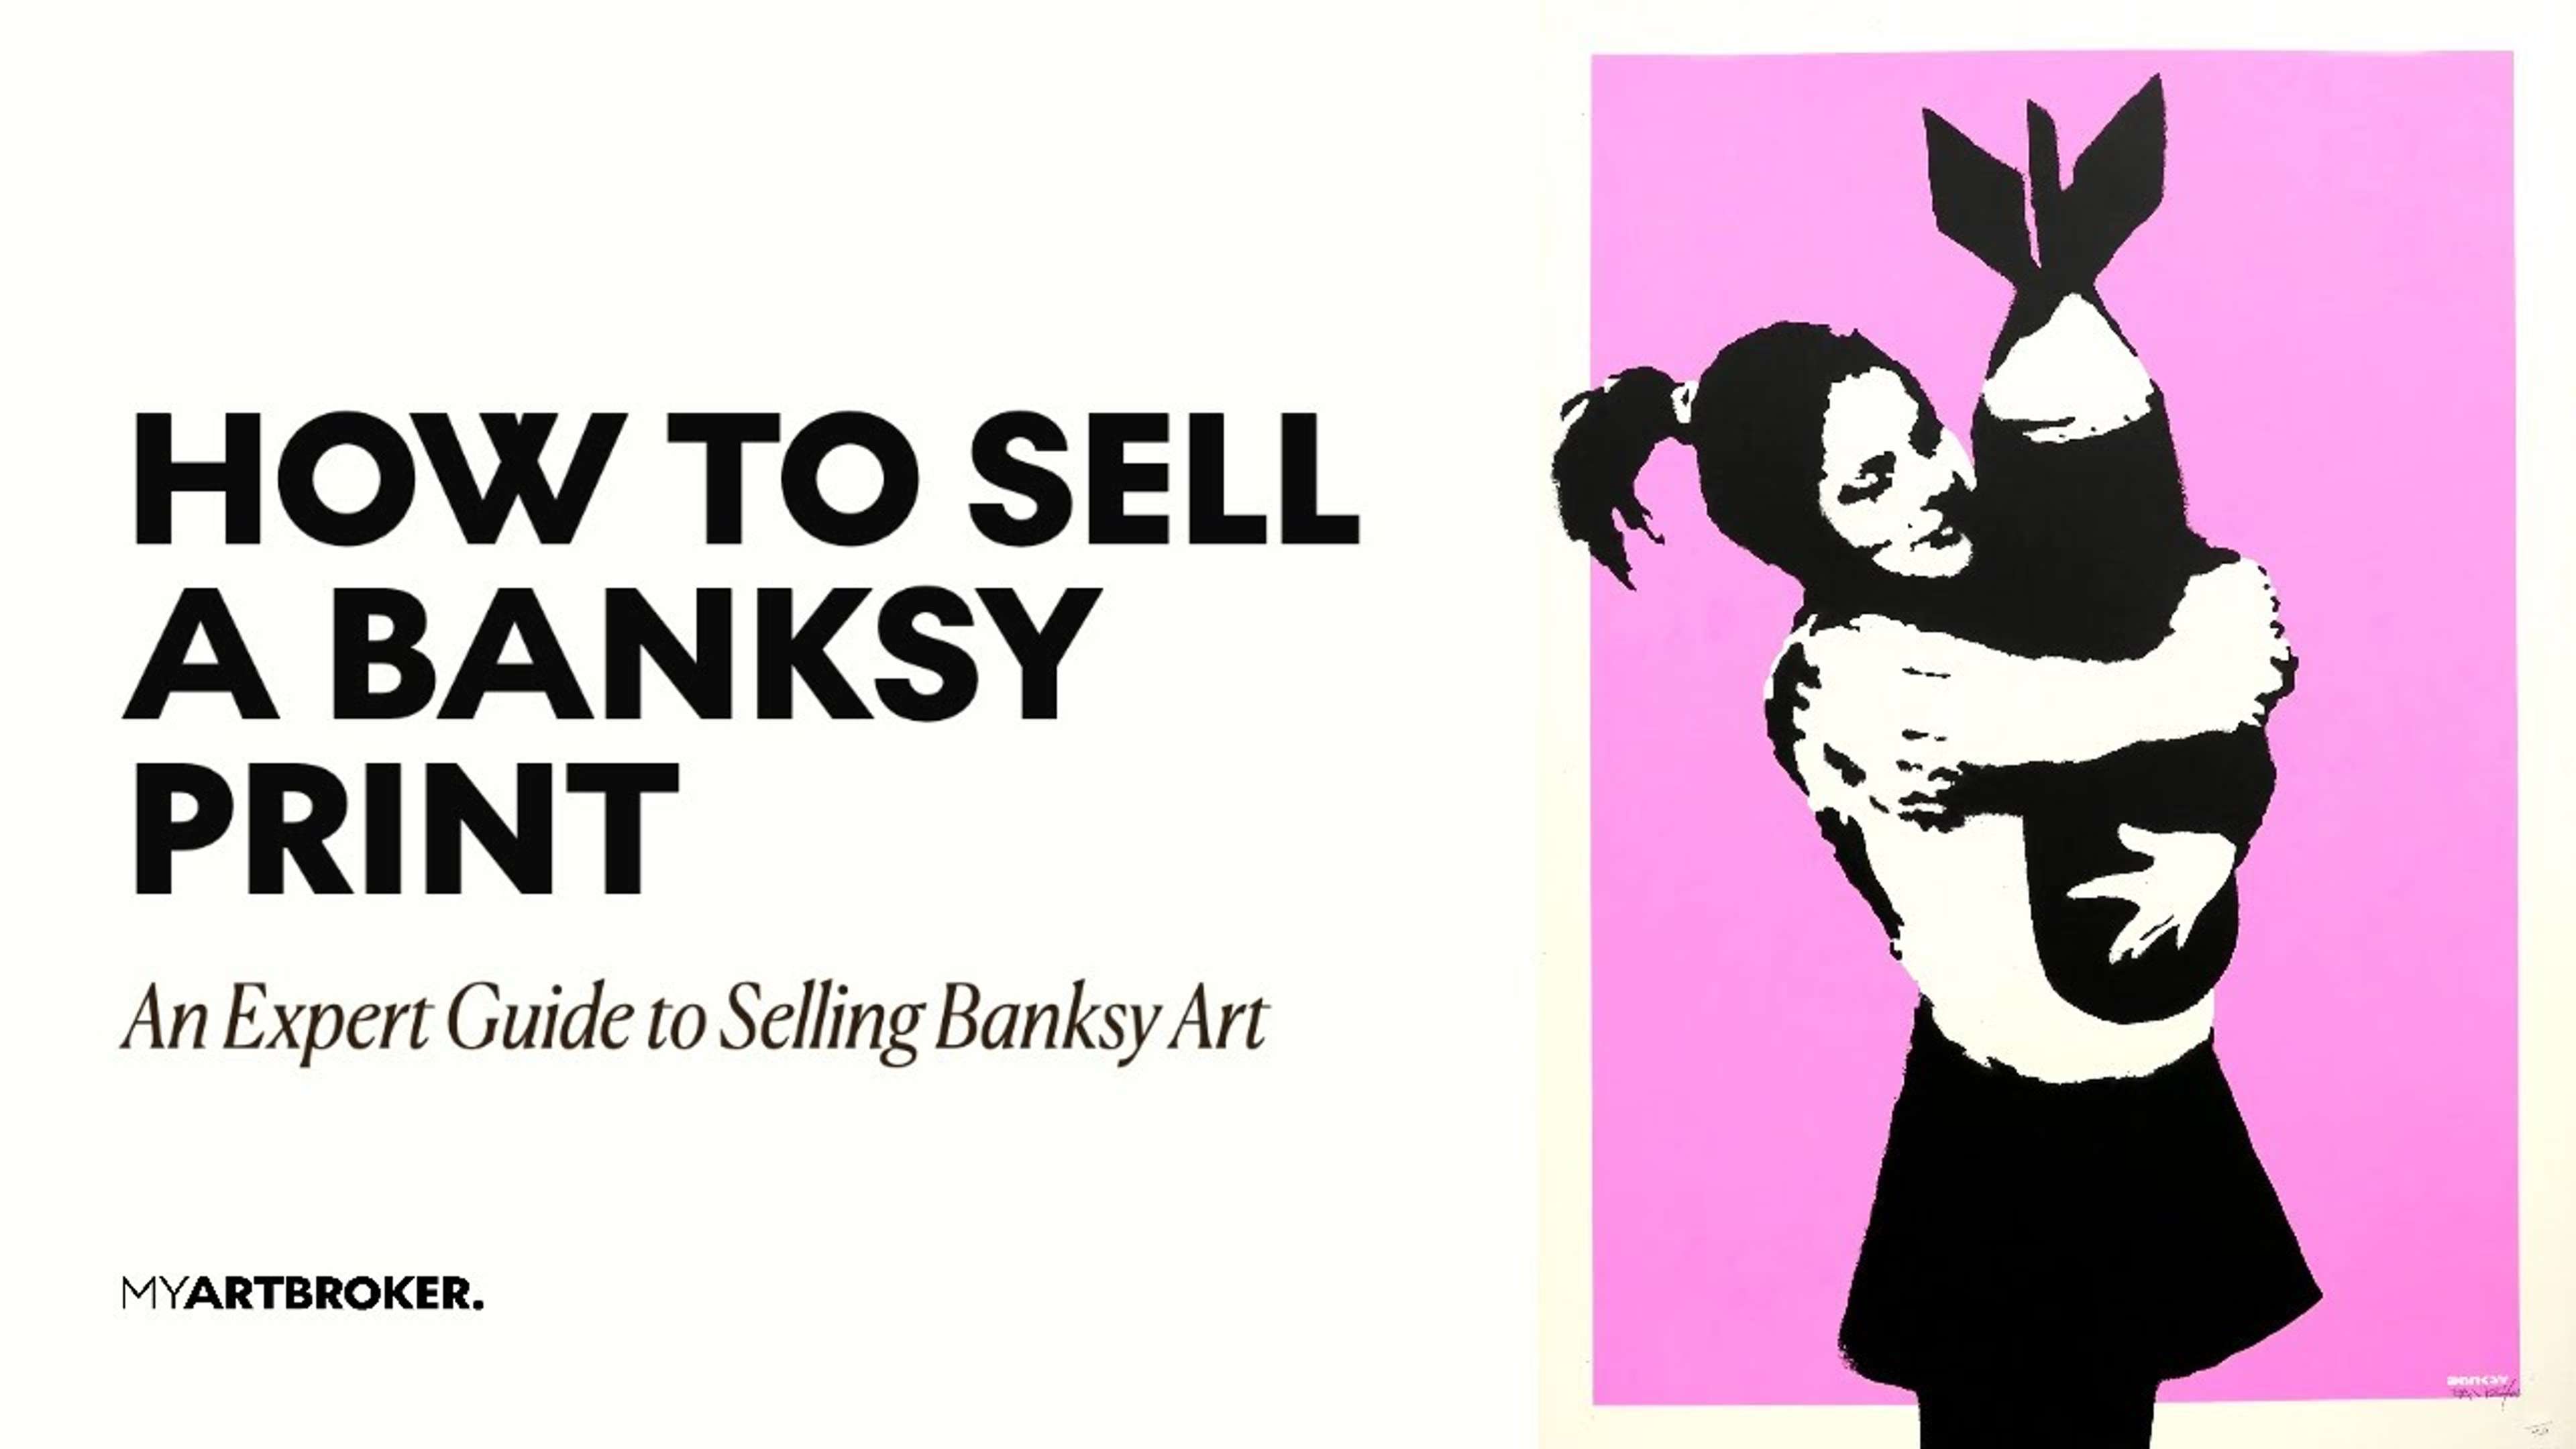 The Expert Guide To Selling A Banksy